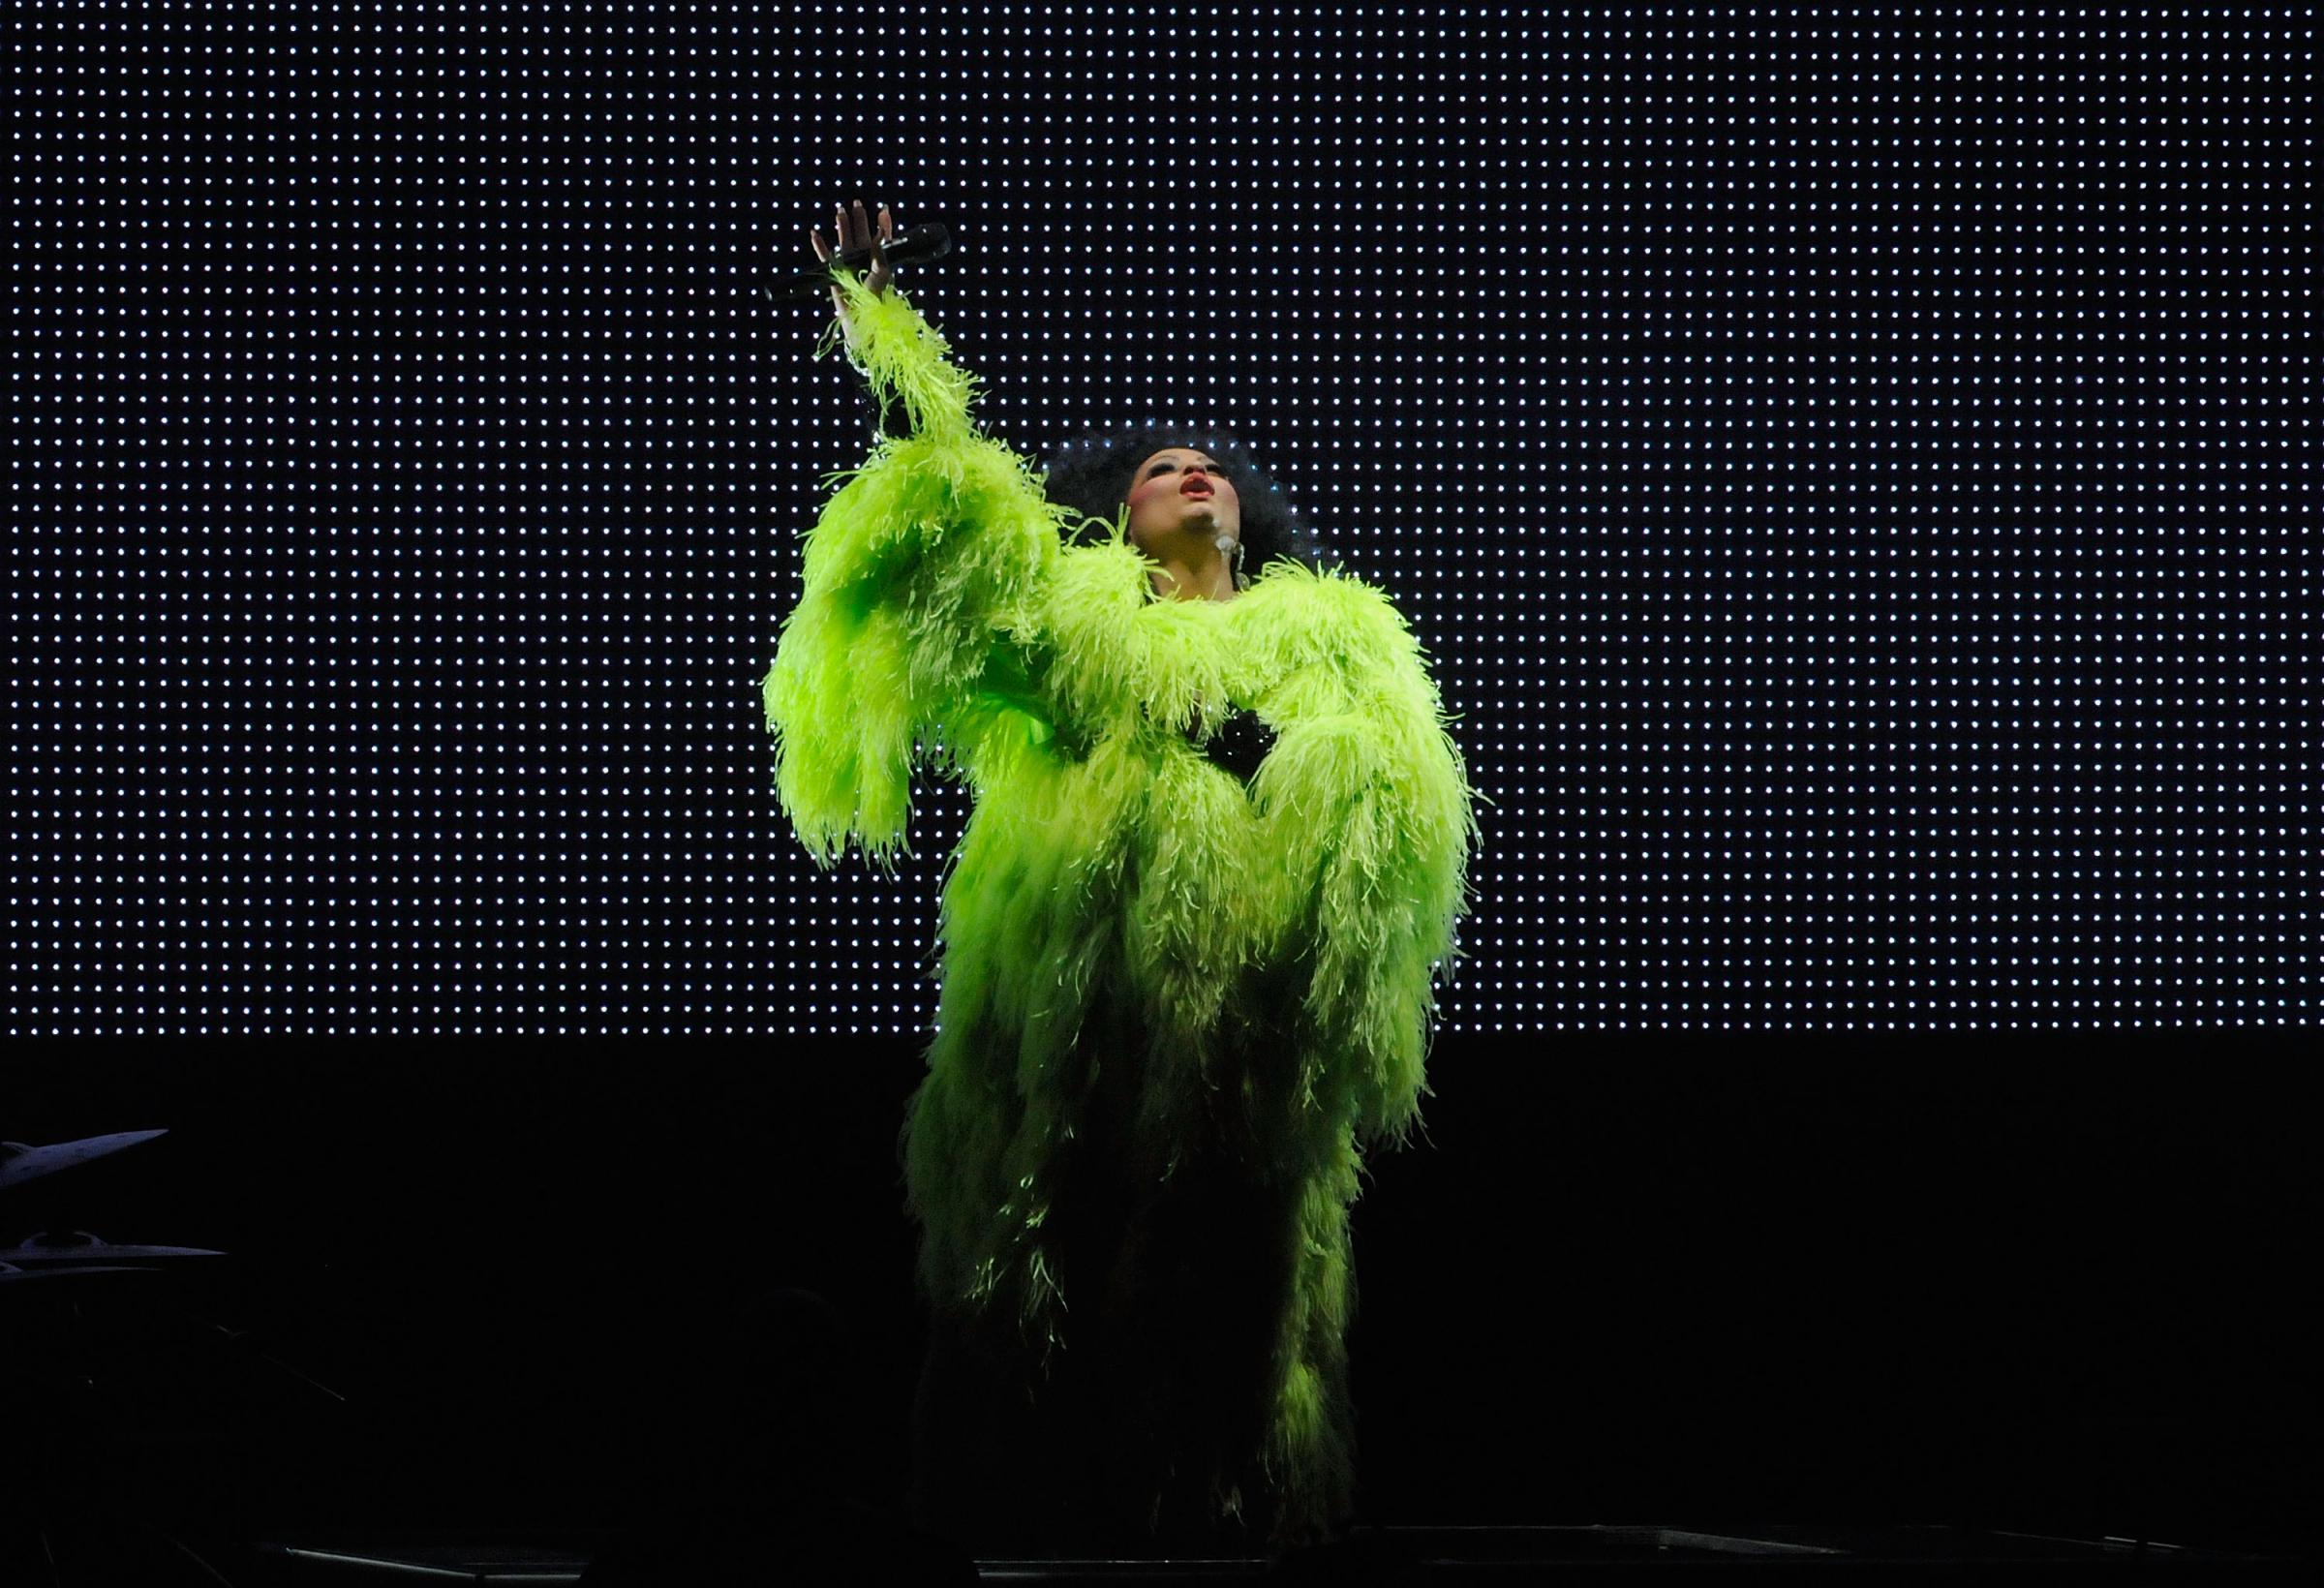 Diana Ross Performs At The Nokia Theatre L.A. Live